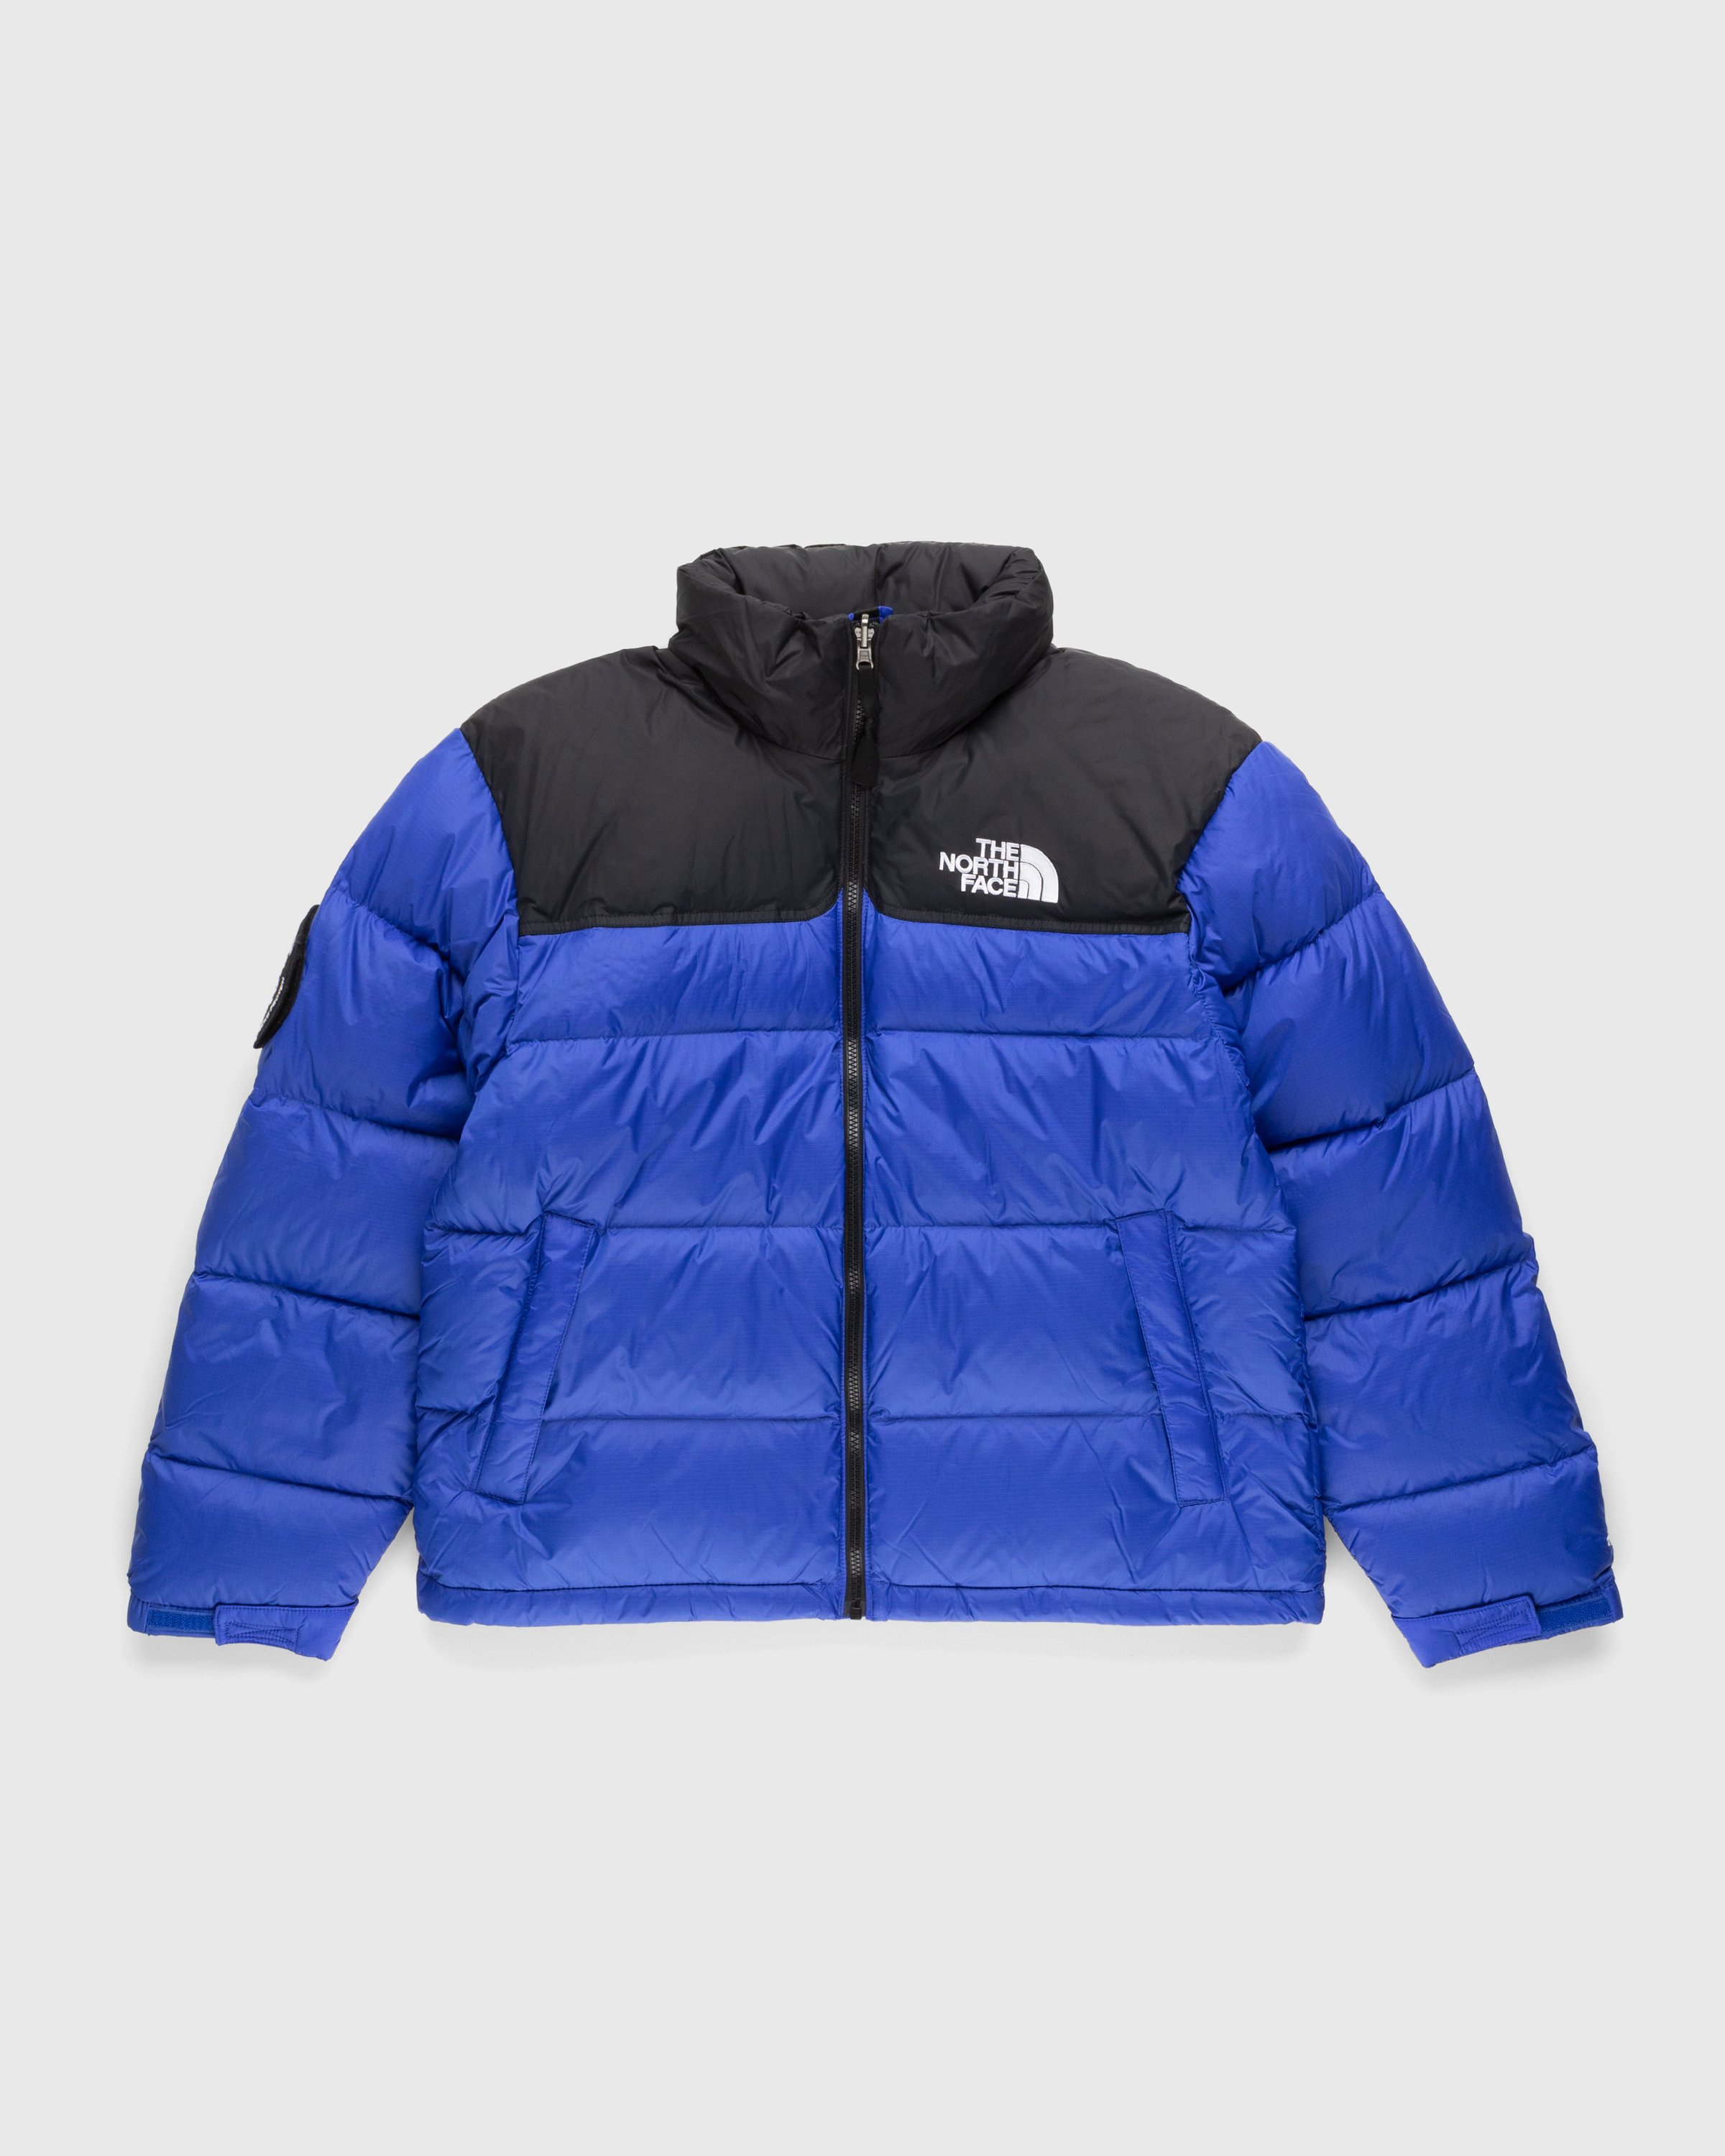 The North Face - ‘92 Retro Anniversary Nuptse Jacket Blue - Clothing - Red - Image 1